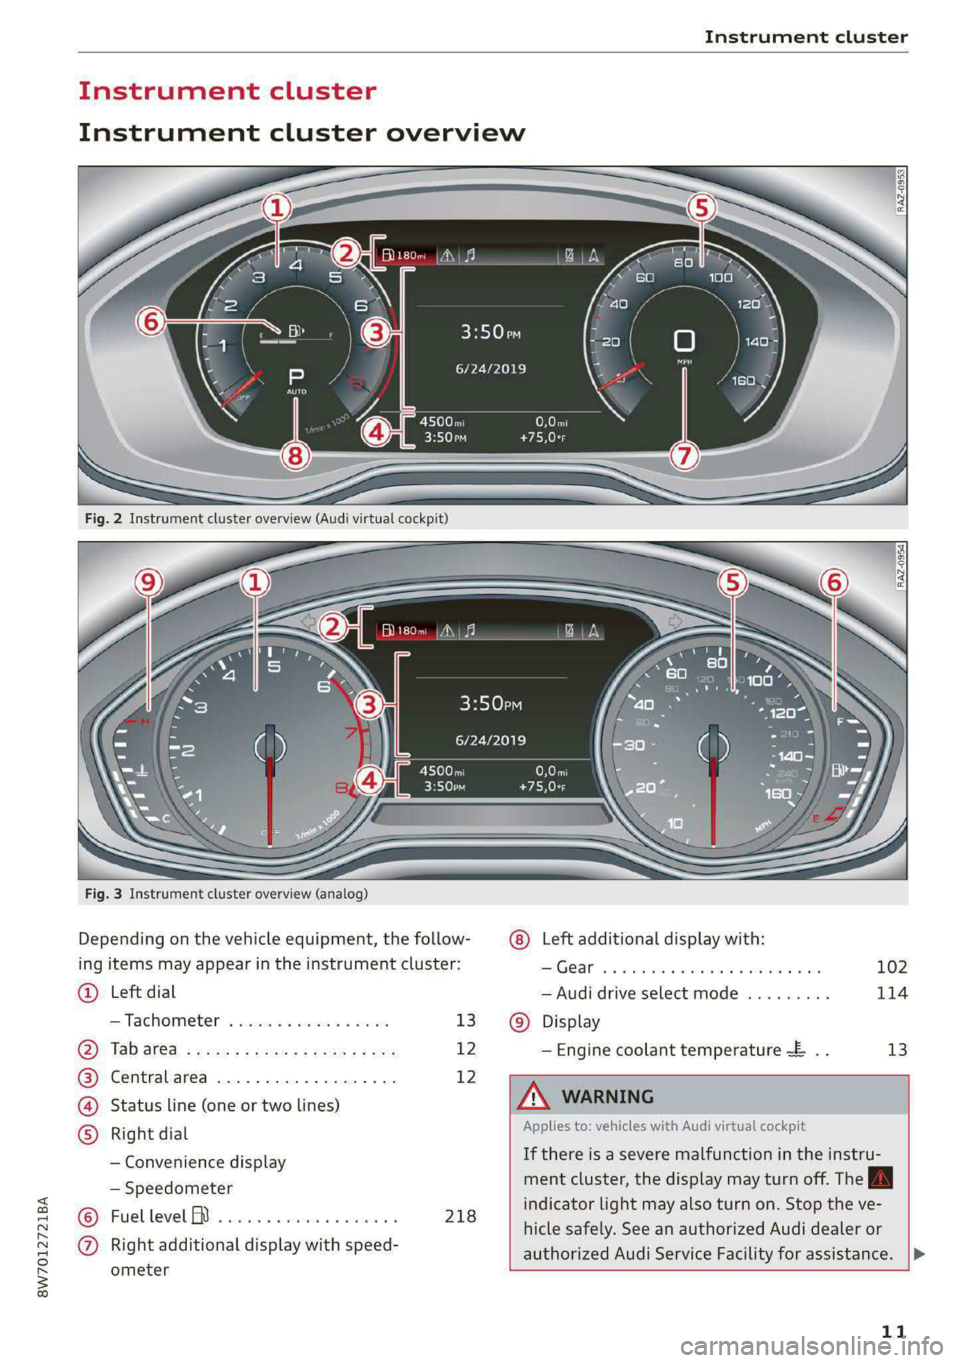 AUDI A5 2020  Owners Manual 8W7012721BA 
Instrument cluster 
  
00 T 
  
Fig. 3 Instrument cluster overview (analog) 
Depending on the vehicle equipment, the follow- 
ing items may appear in the instrument cluster: 
@ Left dial 